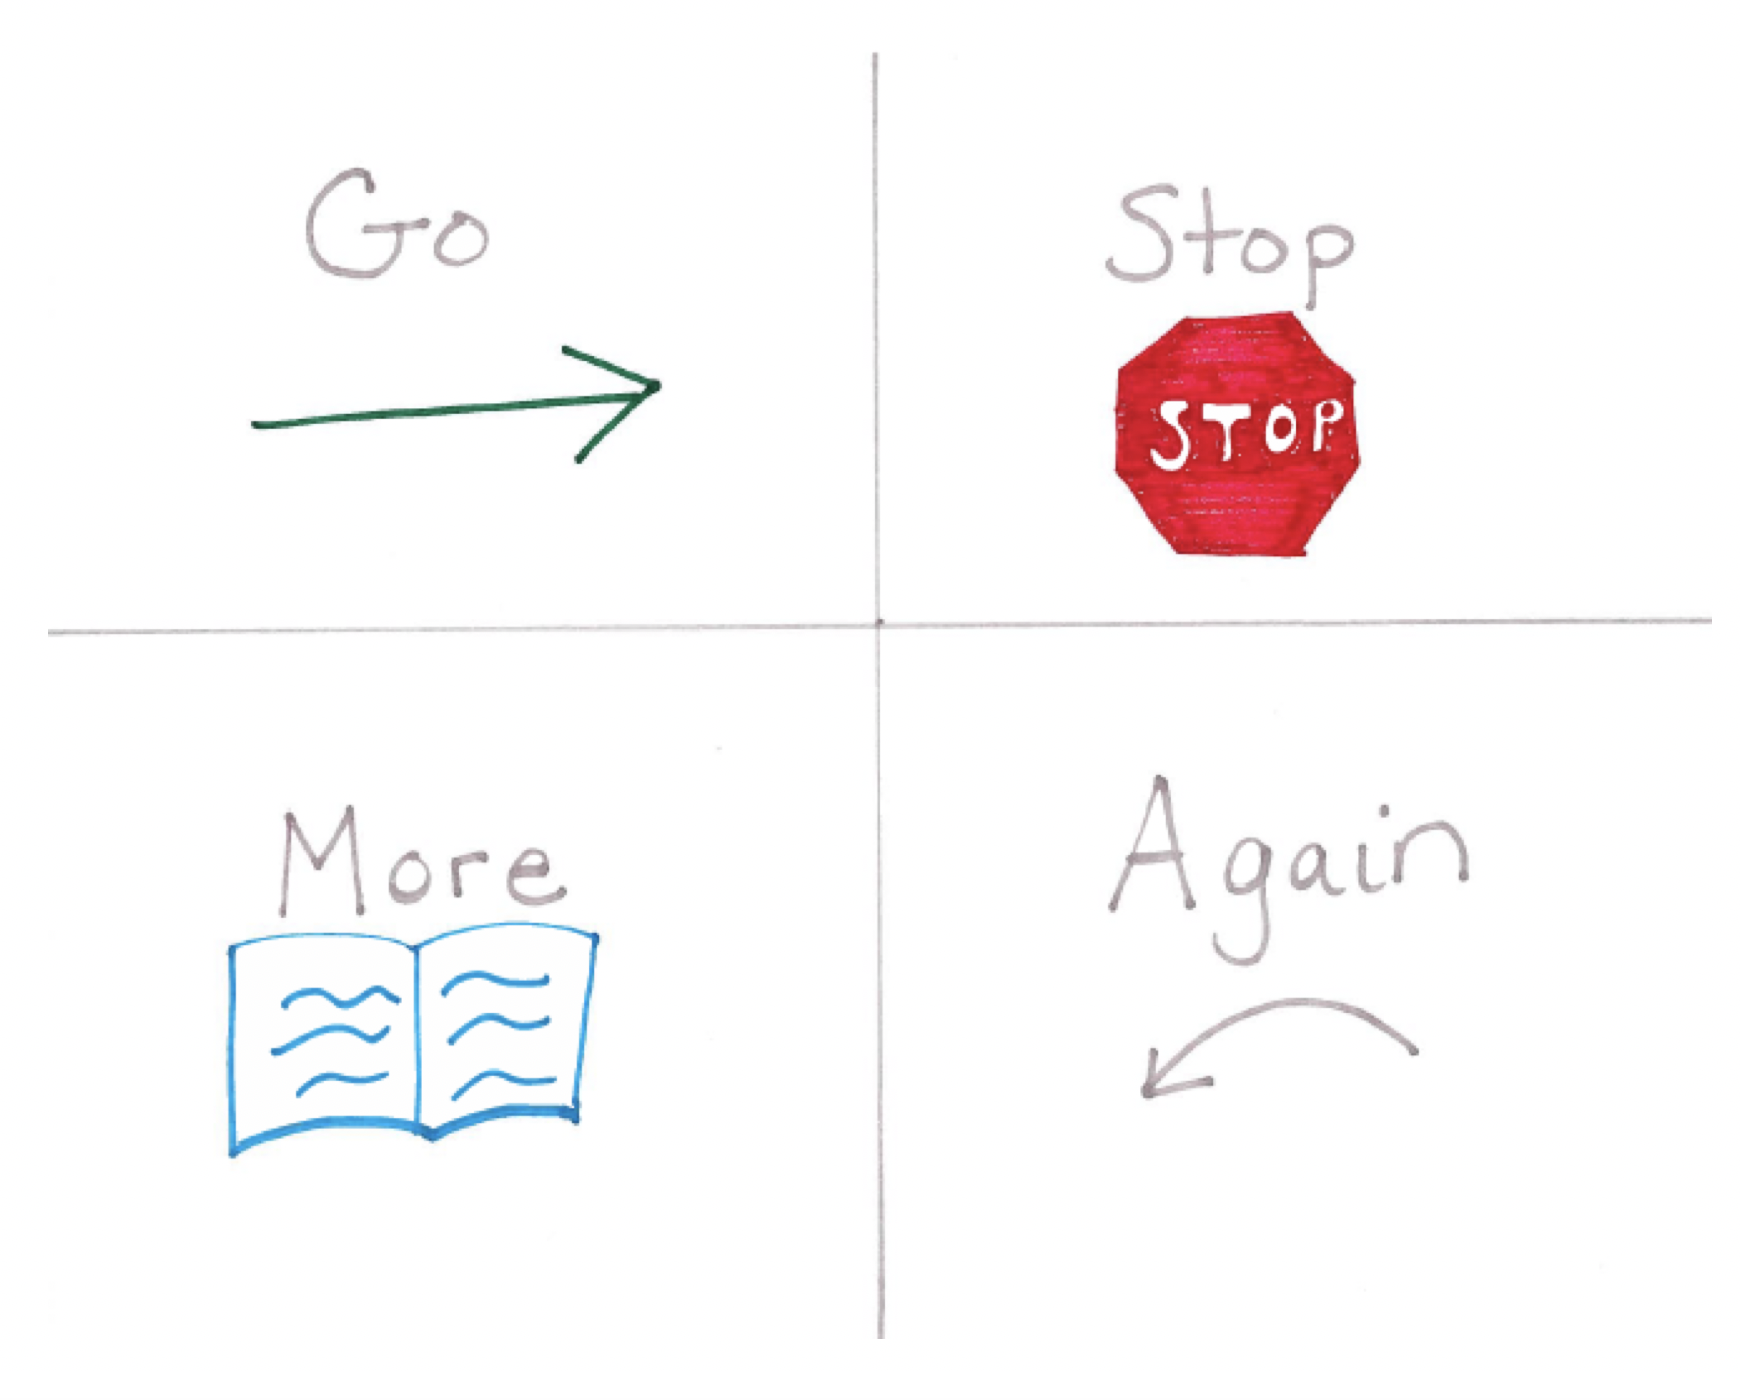 Hand drawn vacab board containing the words "Go" (with forward arrow), "Stop" (with stop sign), "More" (with open book), and "Again" (with reverse arrow).